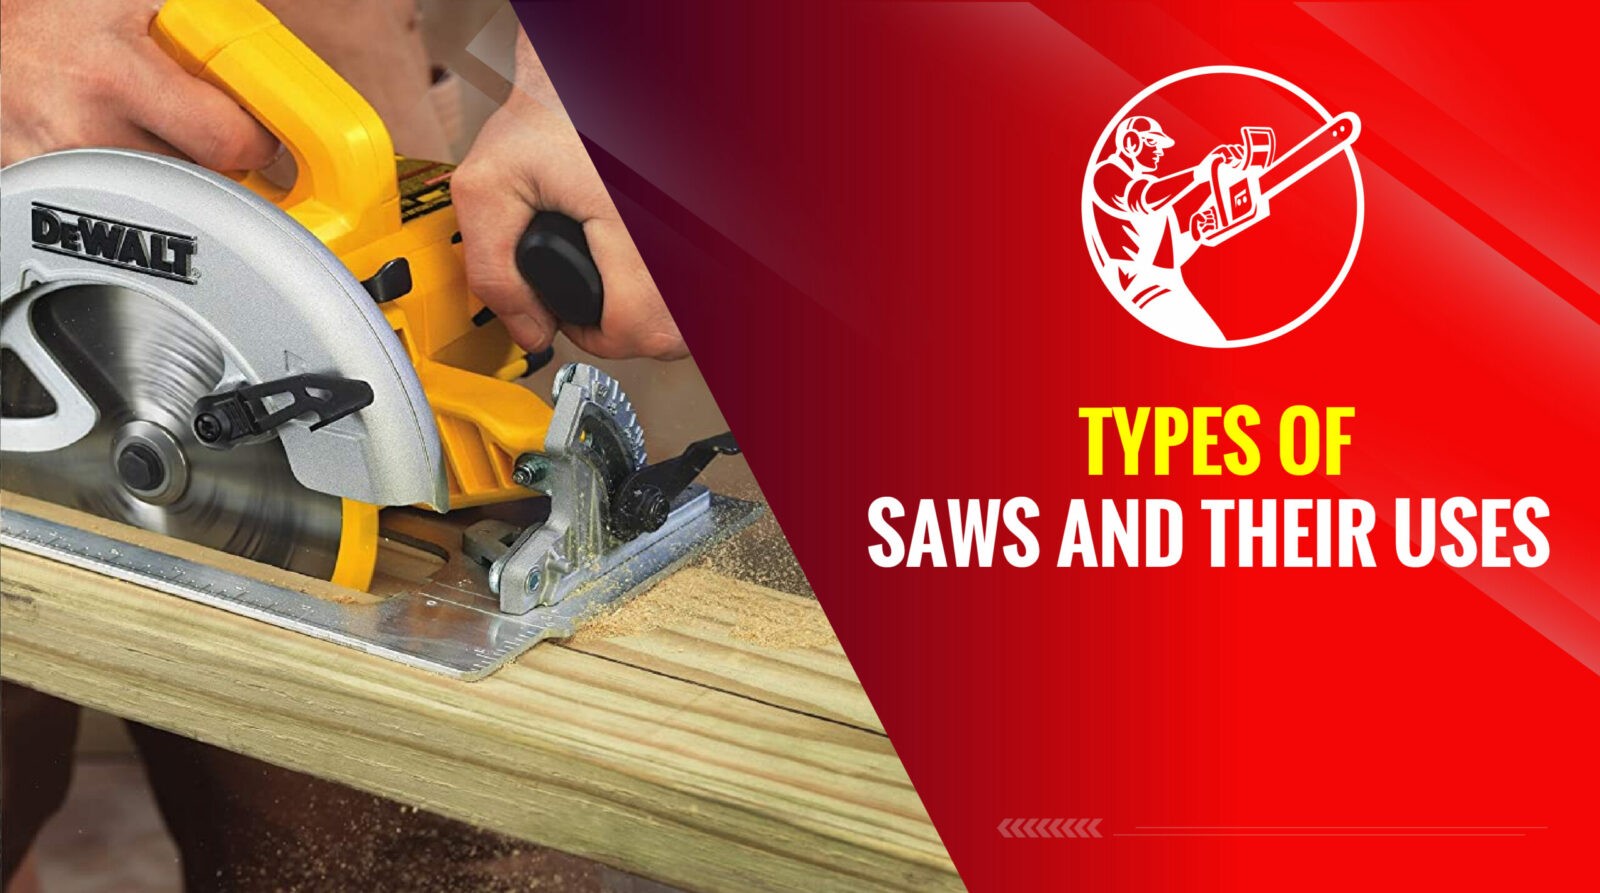 Types of Saws and Their Uses: A Tool Guide